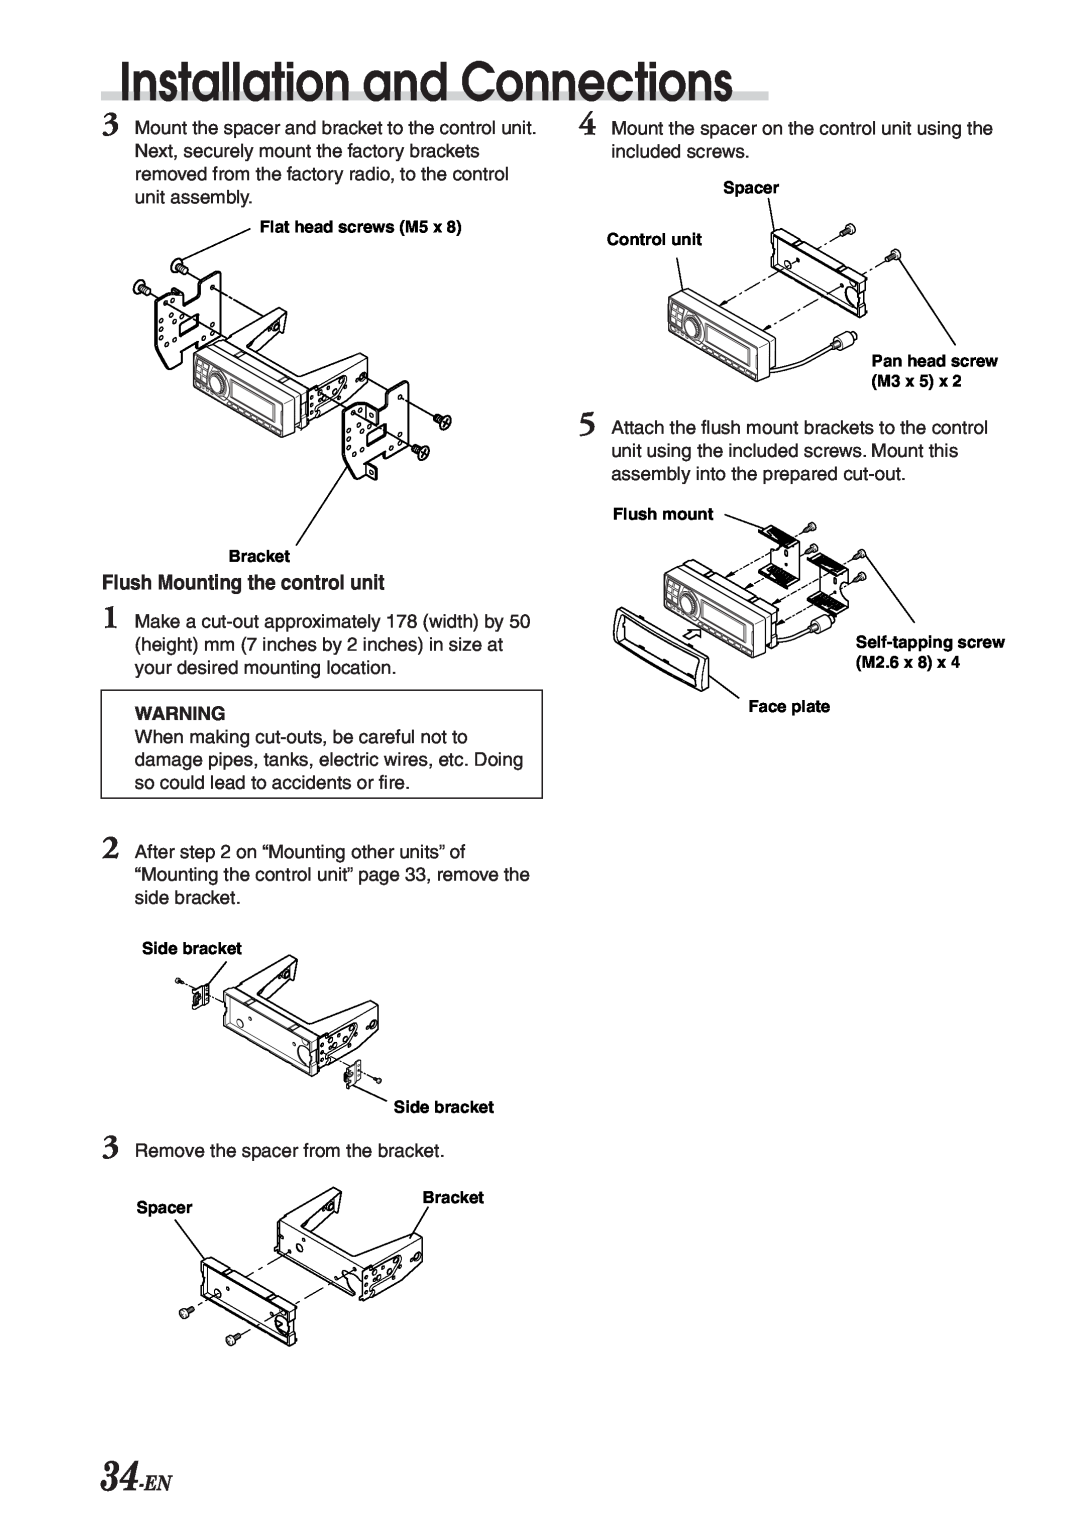 Alpine PXA-H701 owner manual 34-EN, Installation and Connections, Flush Mounting the control unit 